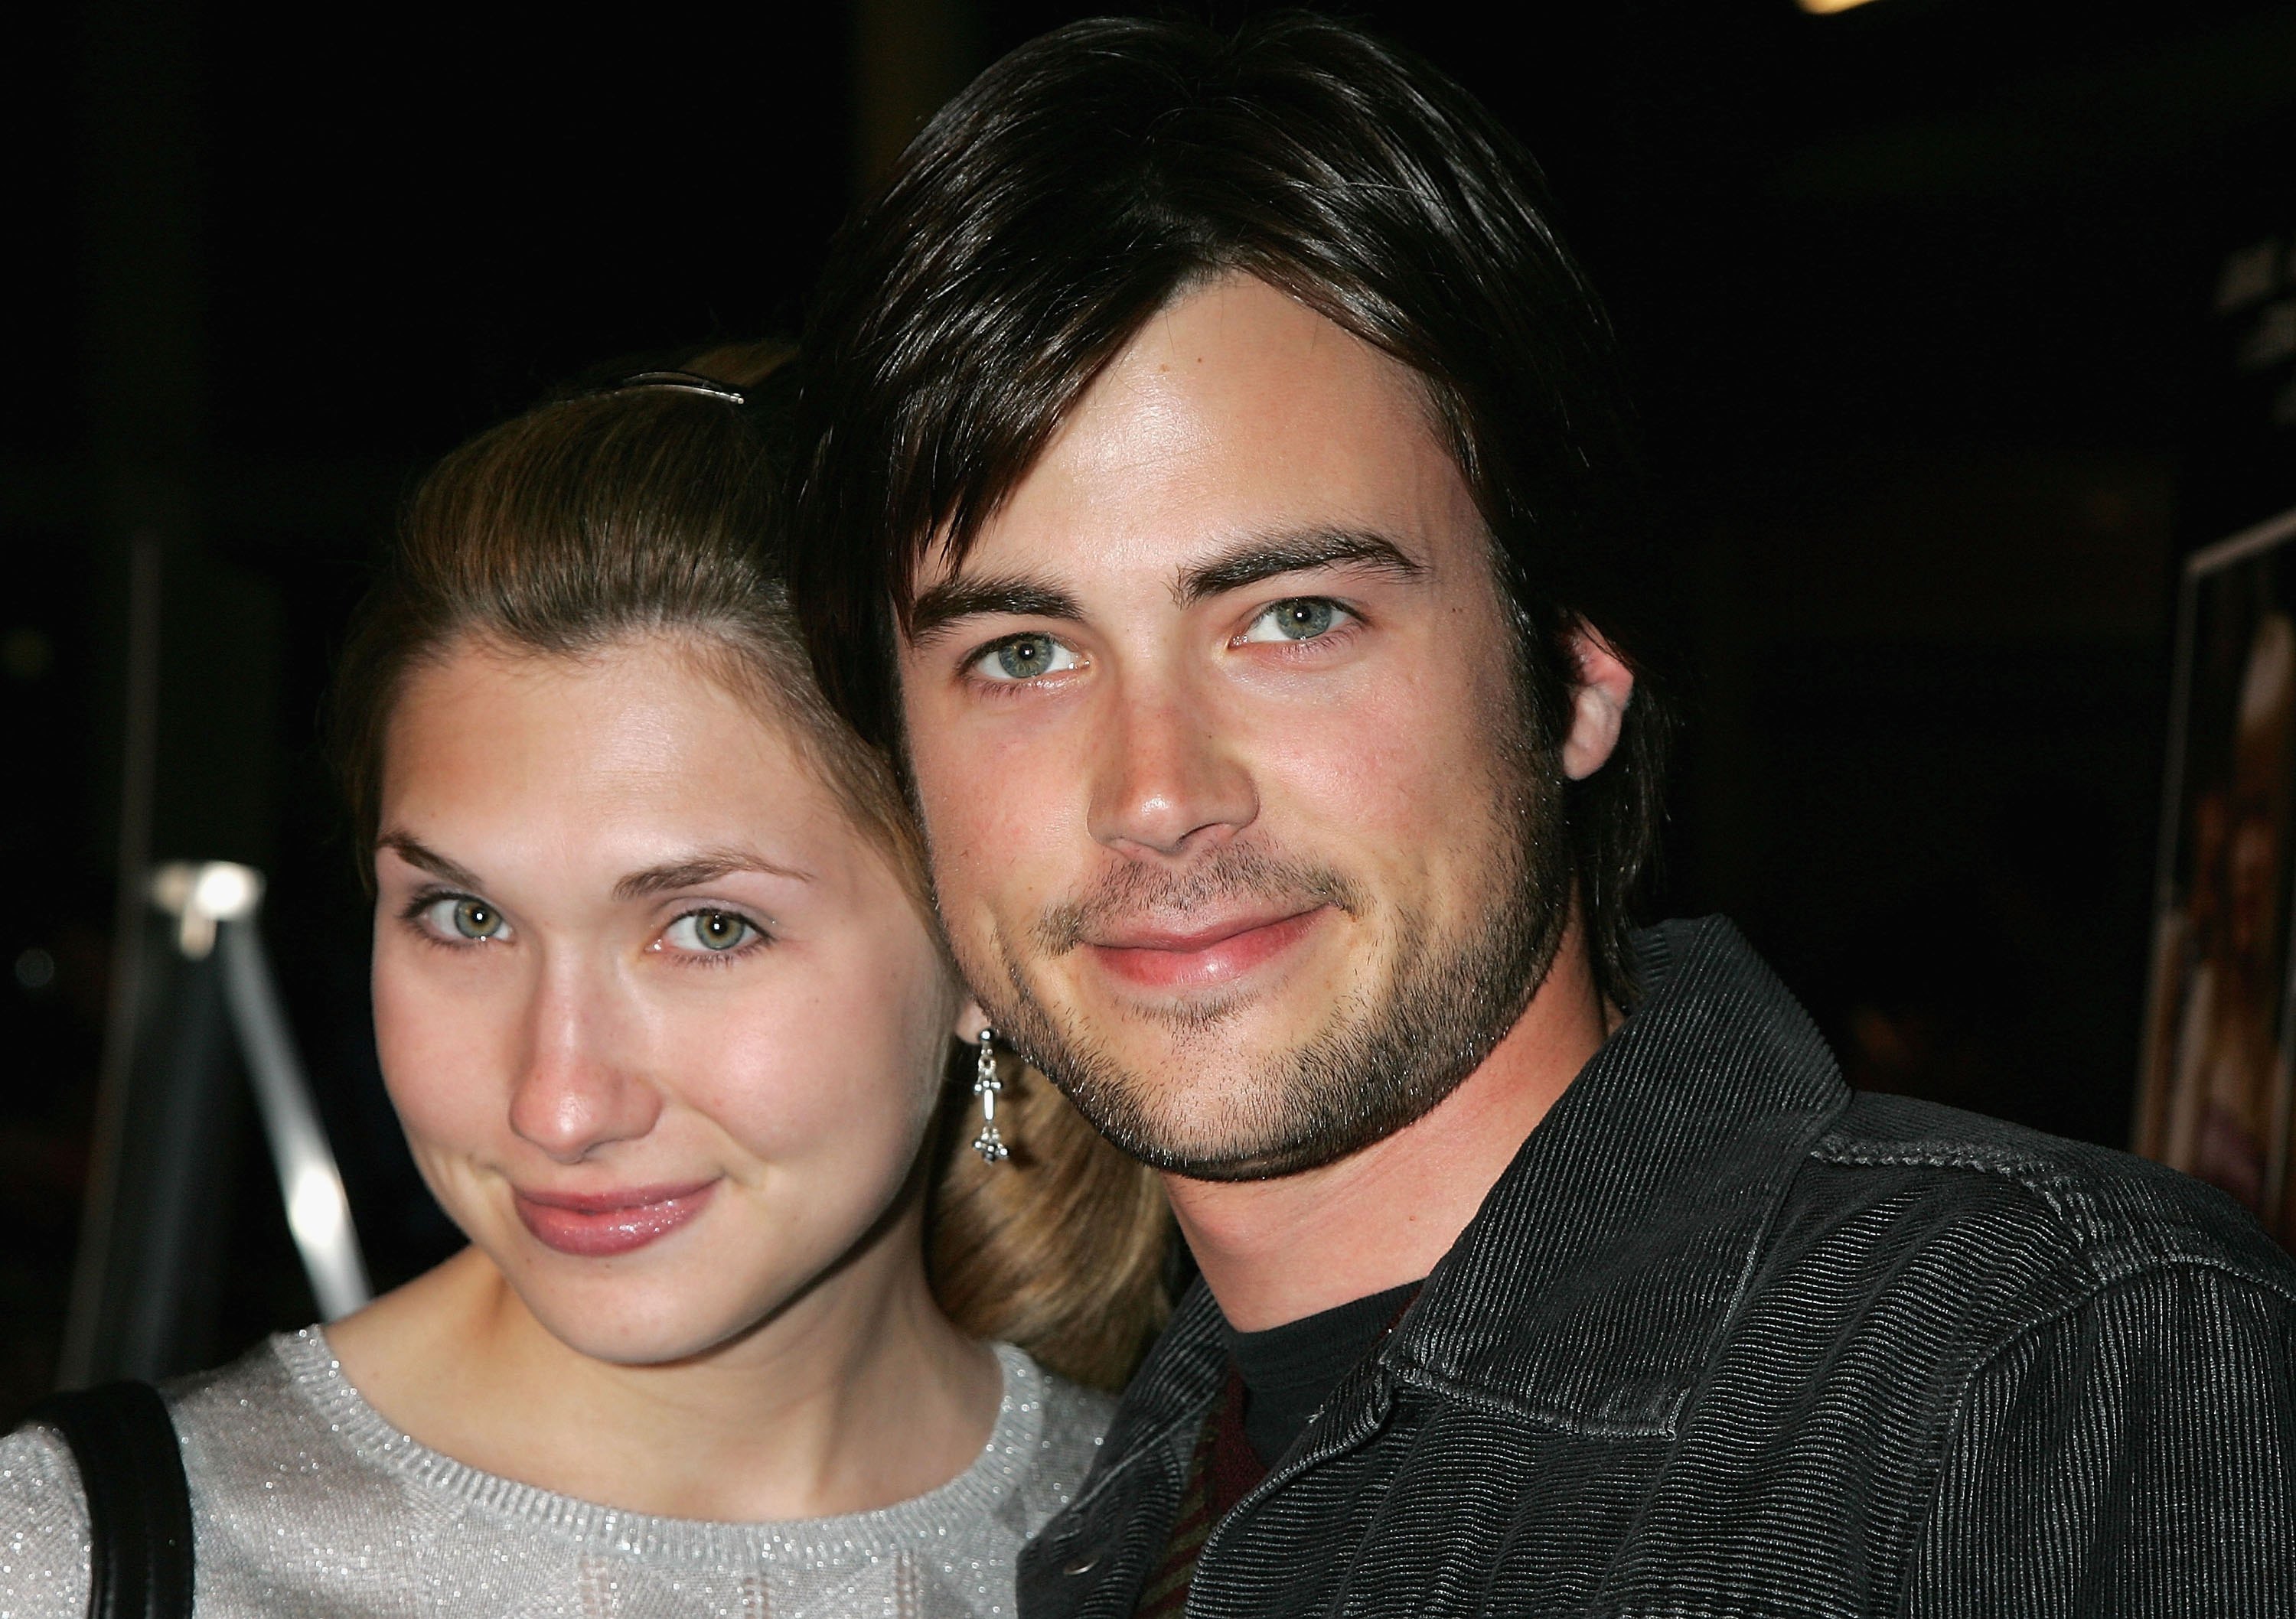 Matt Long and Lora Chaffins at the premiere of "Standing Still" on April 10, 2006, in Hollywood, California. | Source: Getty Images